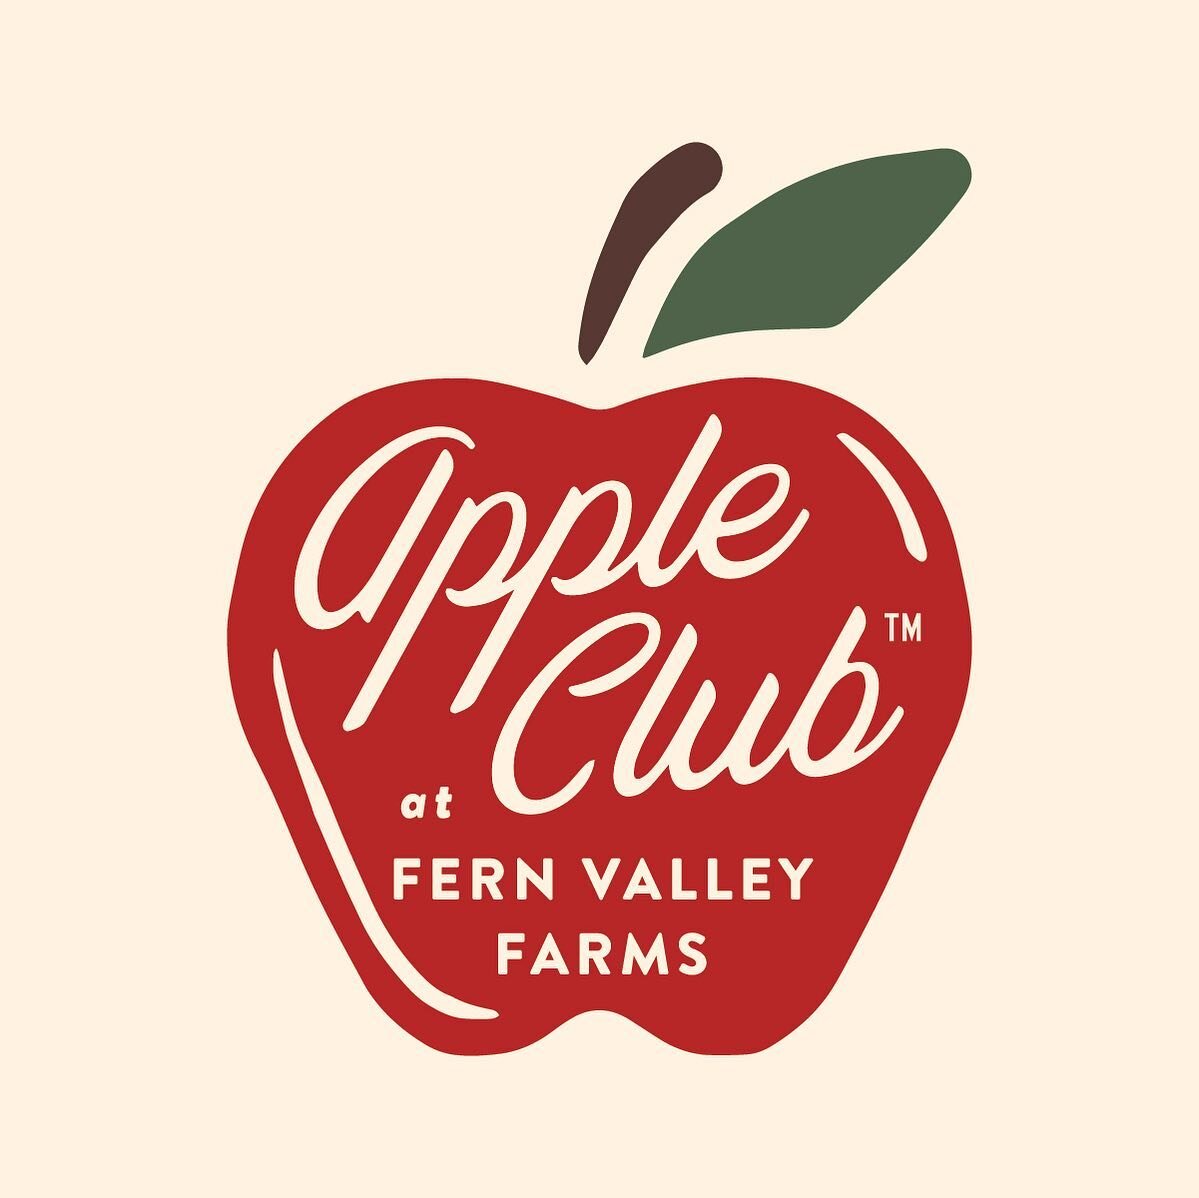 This weekend was the season opener for Pick-Your-Own Apples at Fern Valley Farms! I made this new little Apple Club&trade;️ logo especially for the real PYO warriors. I think we need to make patches. 🍎Every weekend this September - come up and get y